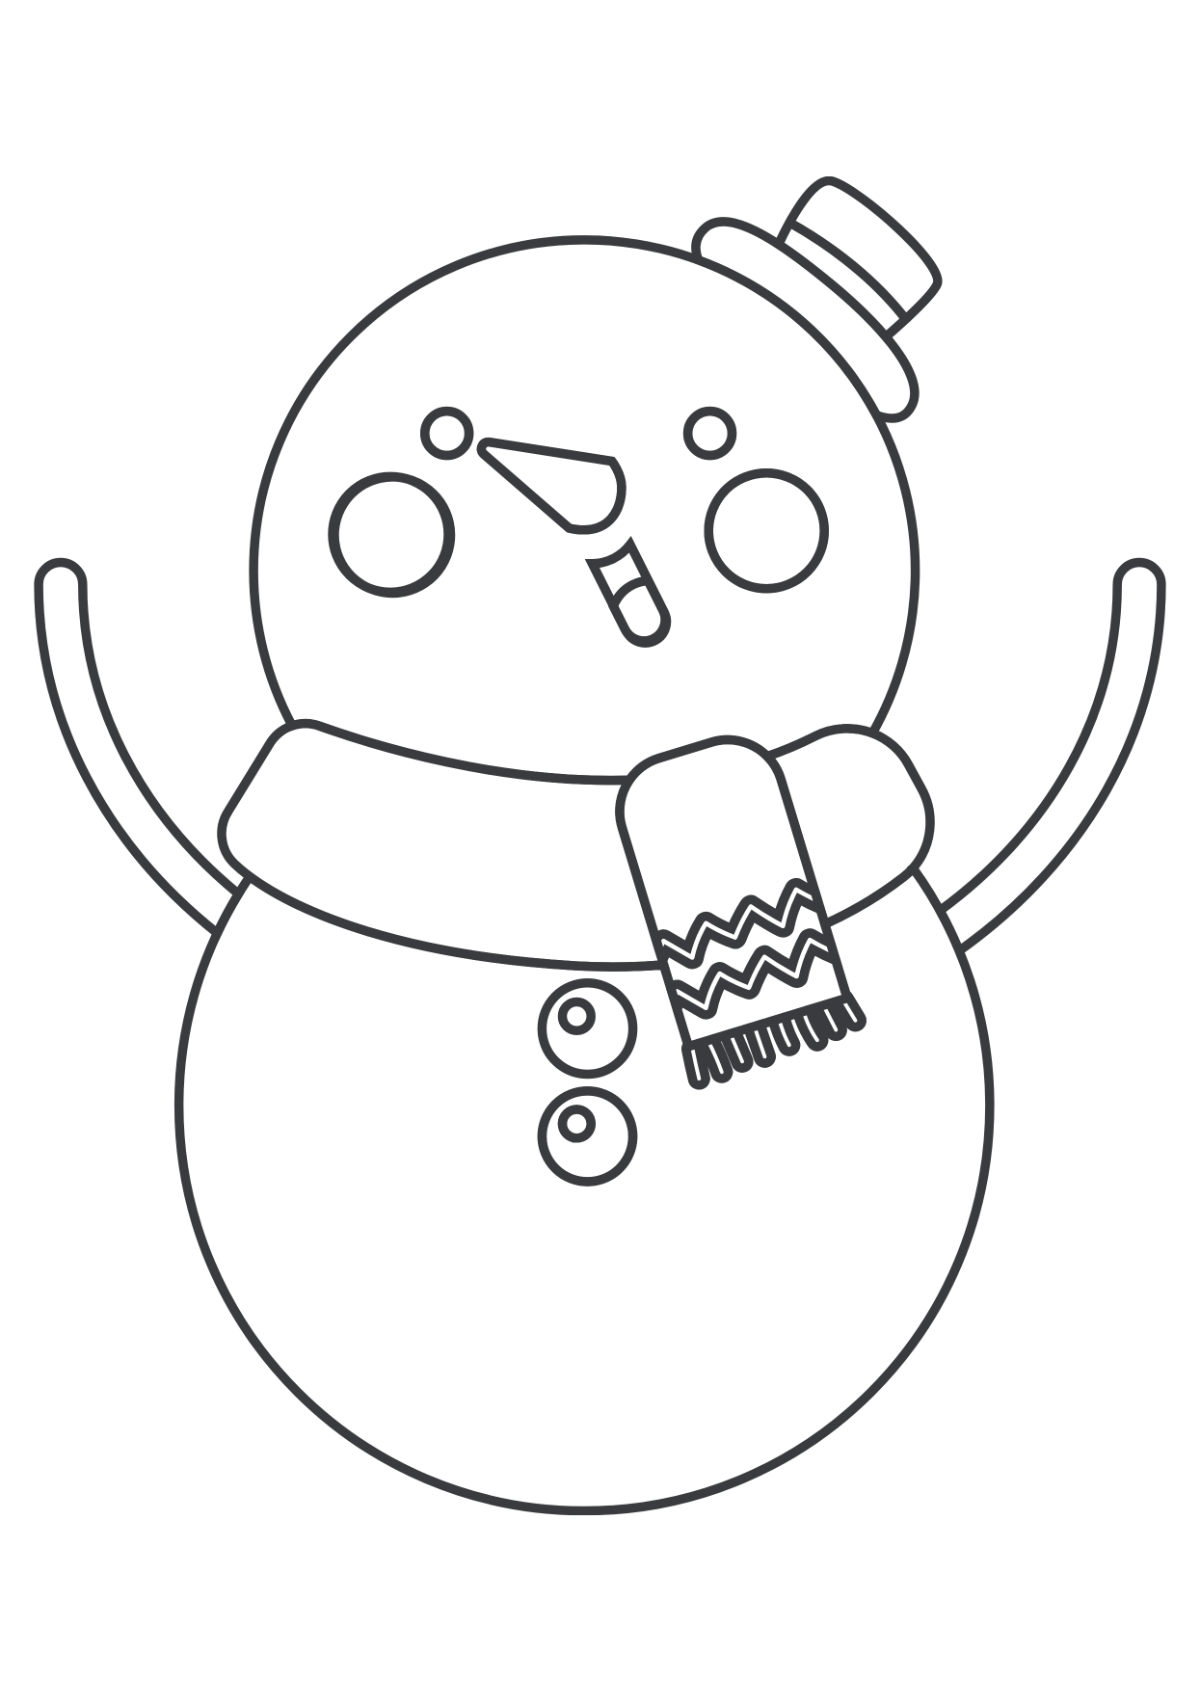 Free Christmas Drawing for Kids Template